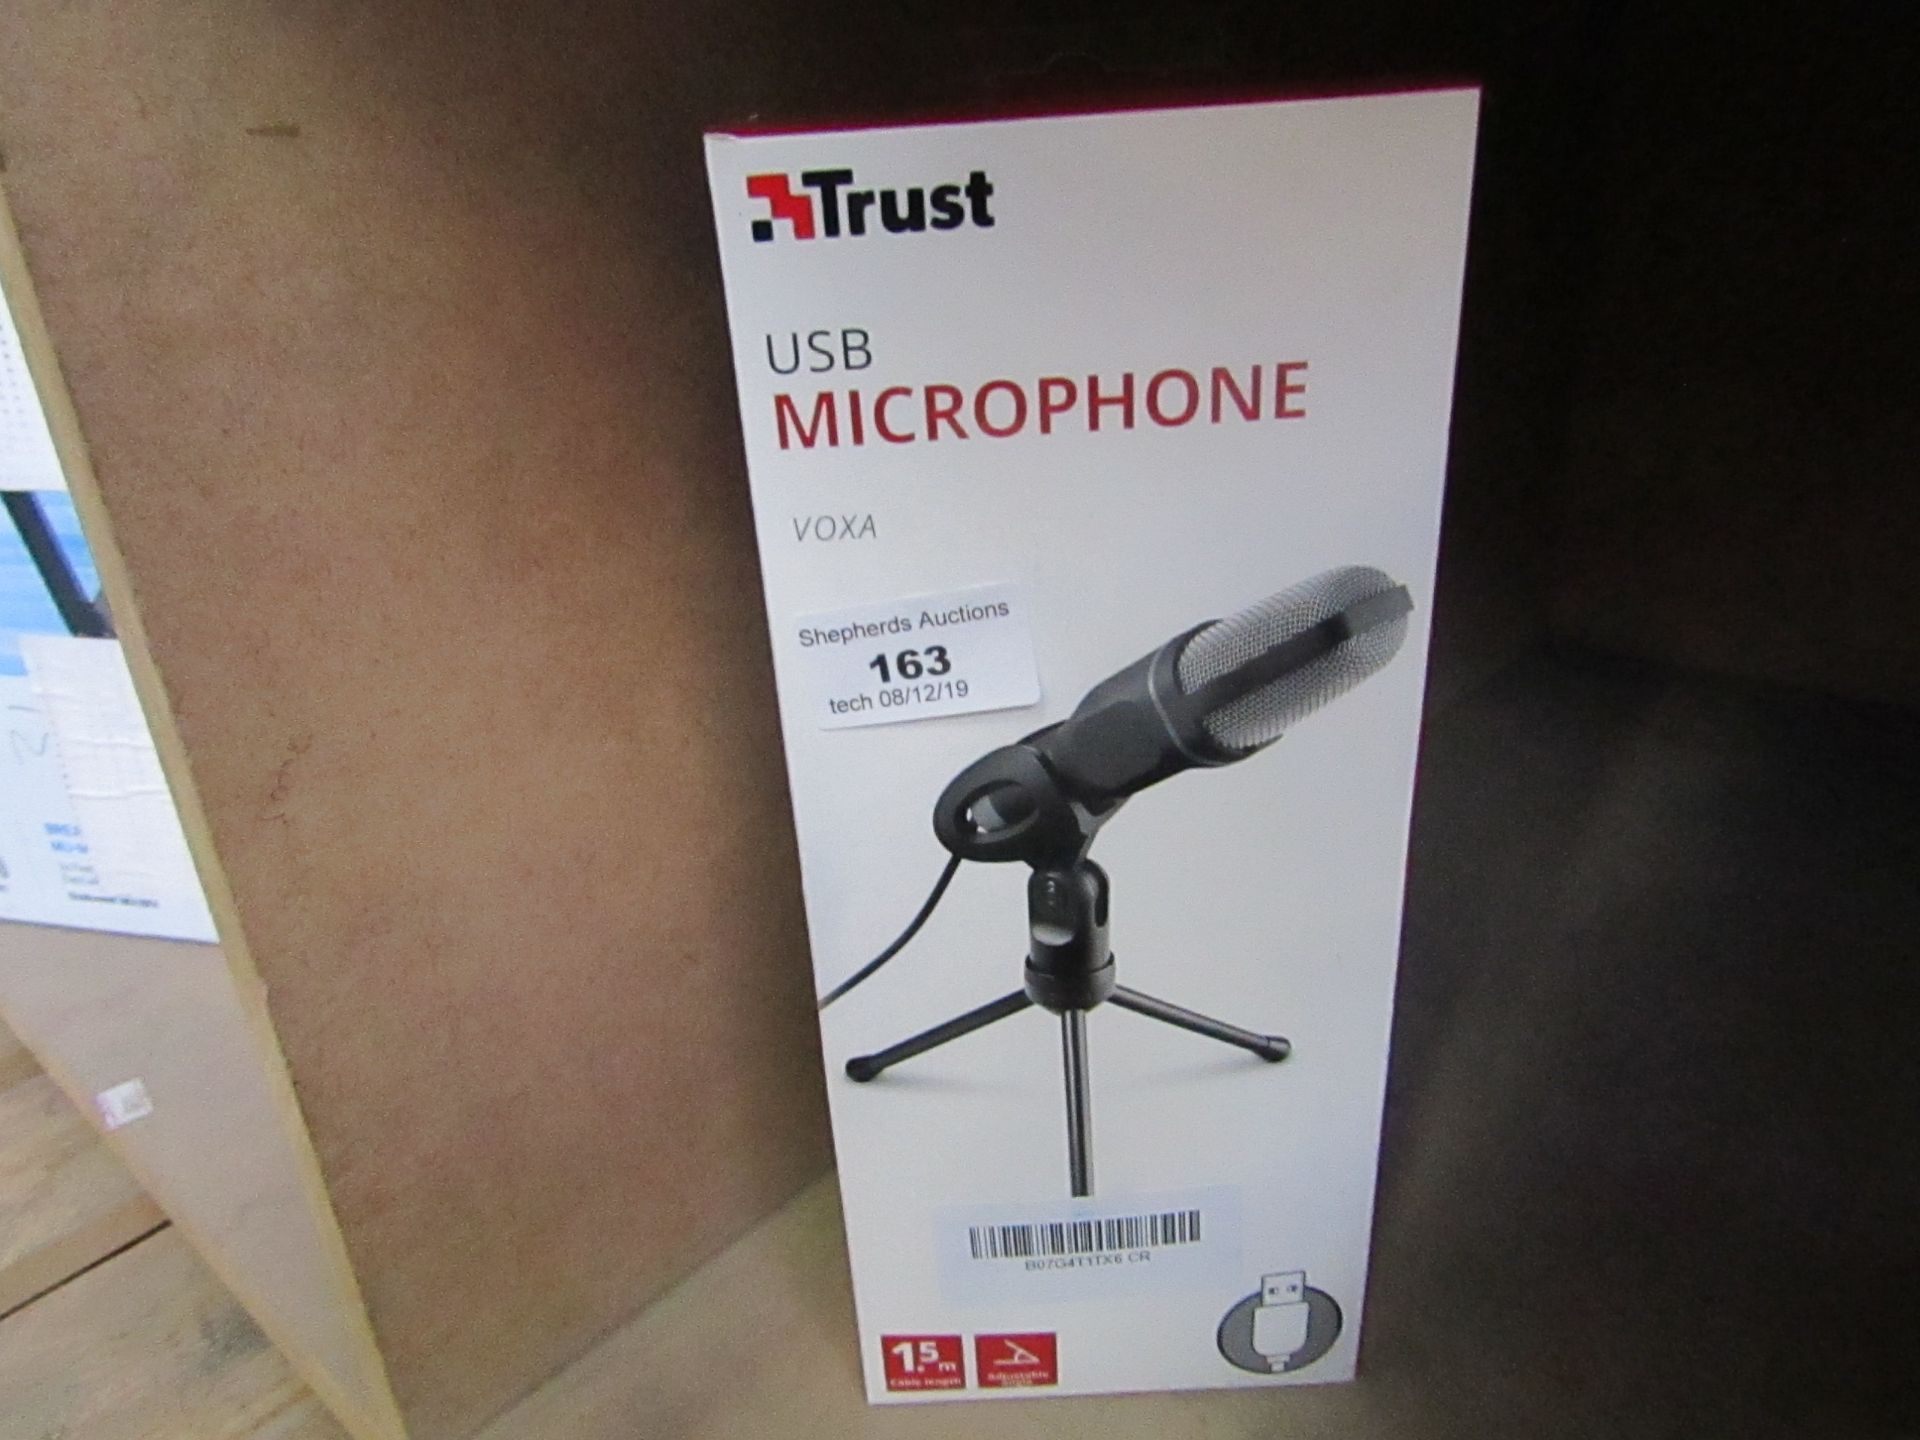 Trust USB micophone, untested and boxed.